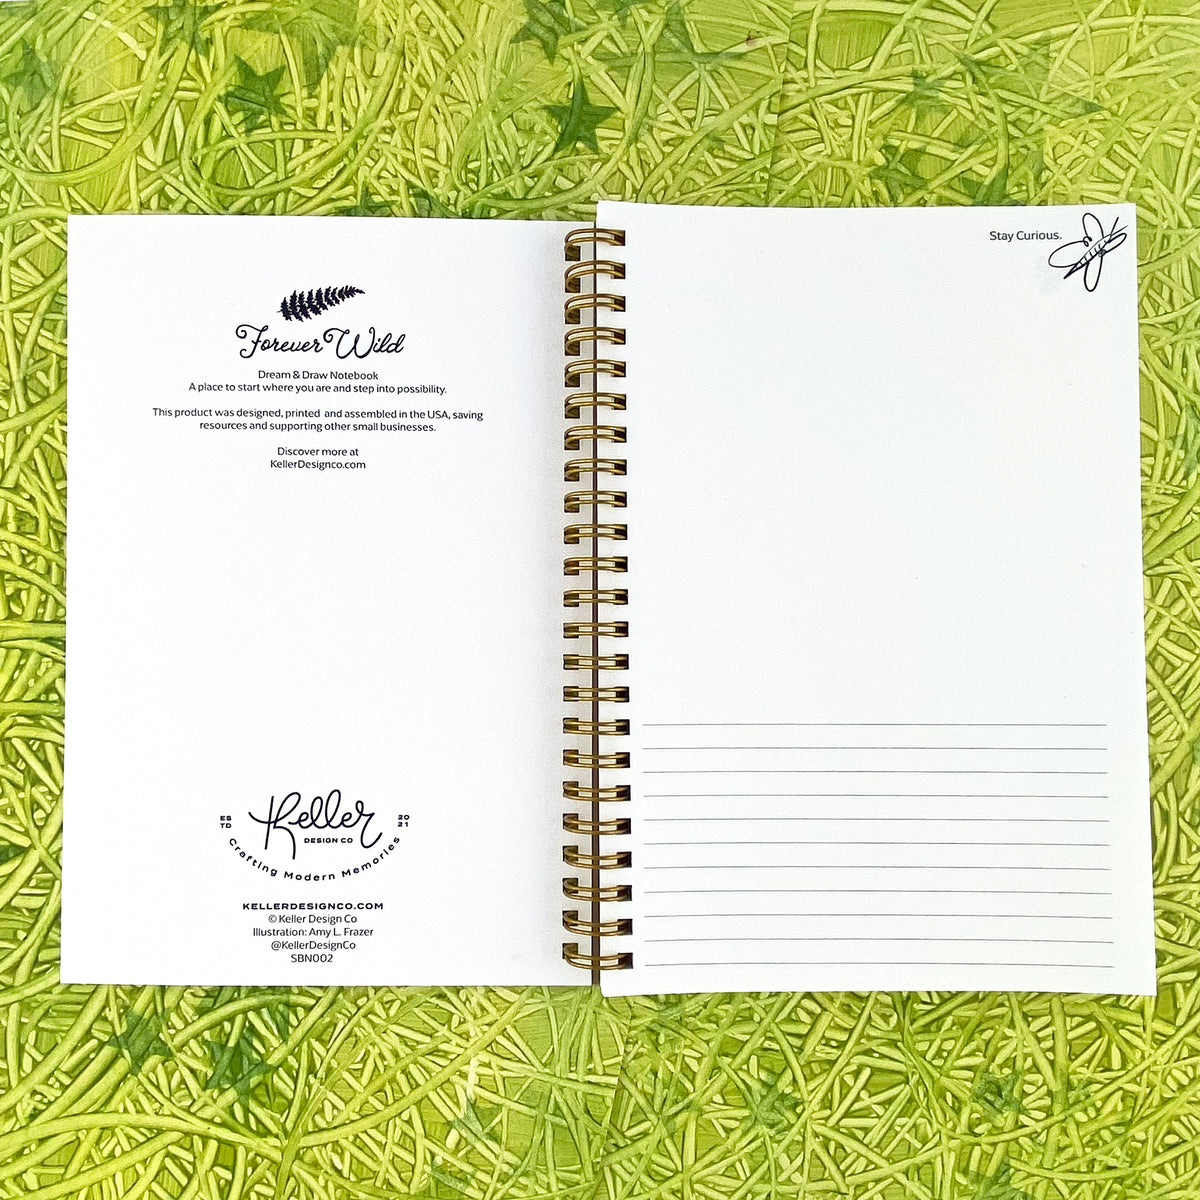 Spiral Bound notebook with white pages, half lines to write on, half blank for drawing. Handpainted green background with swirly textures.